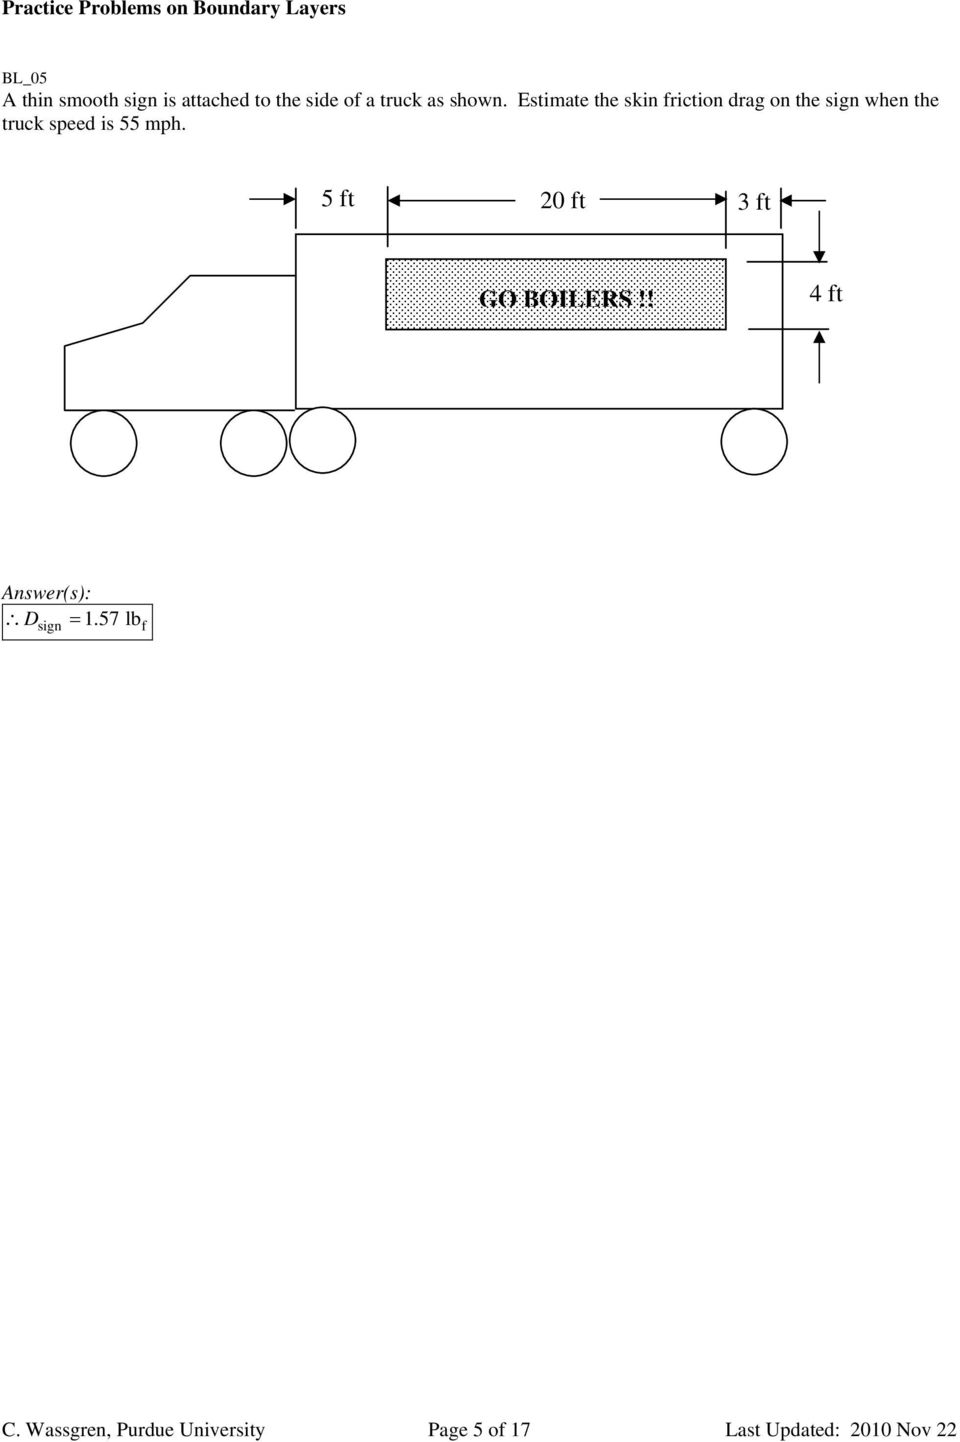 Estimate the skin friction drag on the sign when the truck speed